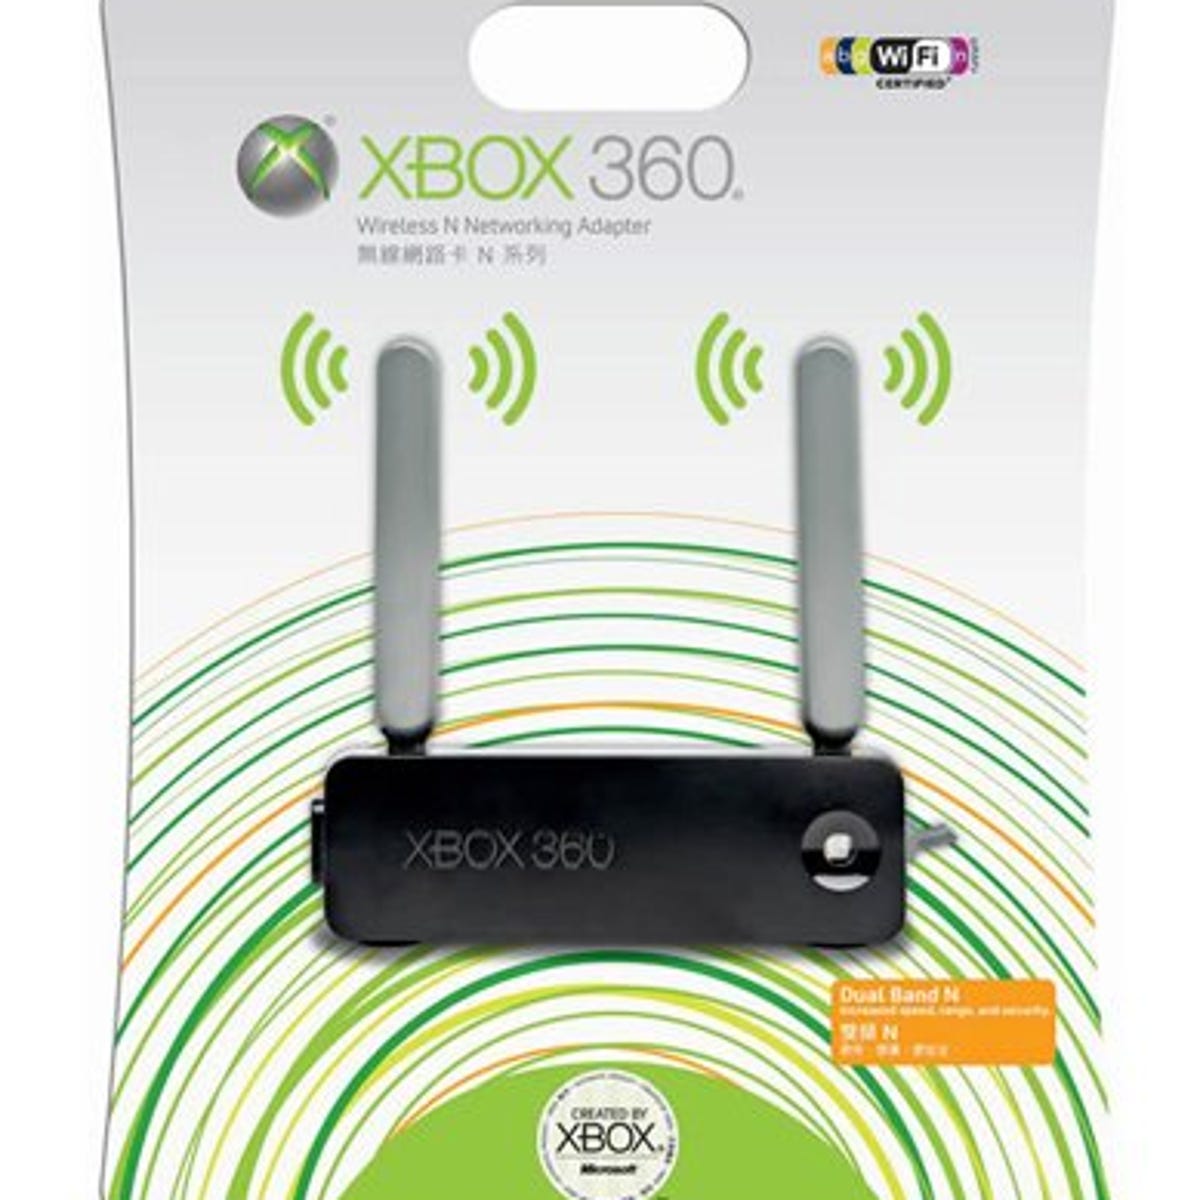 ting Misbrug depositum Get an Xbox 360 Wireless N Adapter for $79.99 - CNET